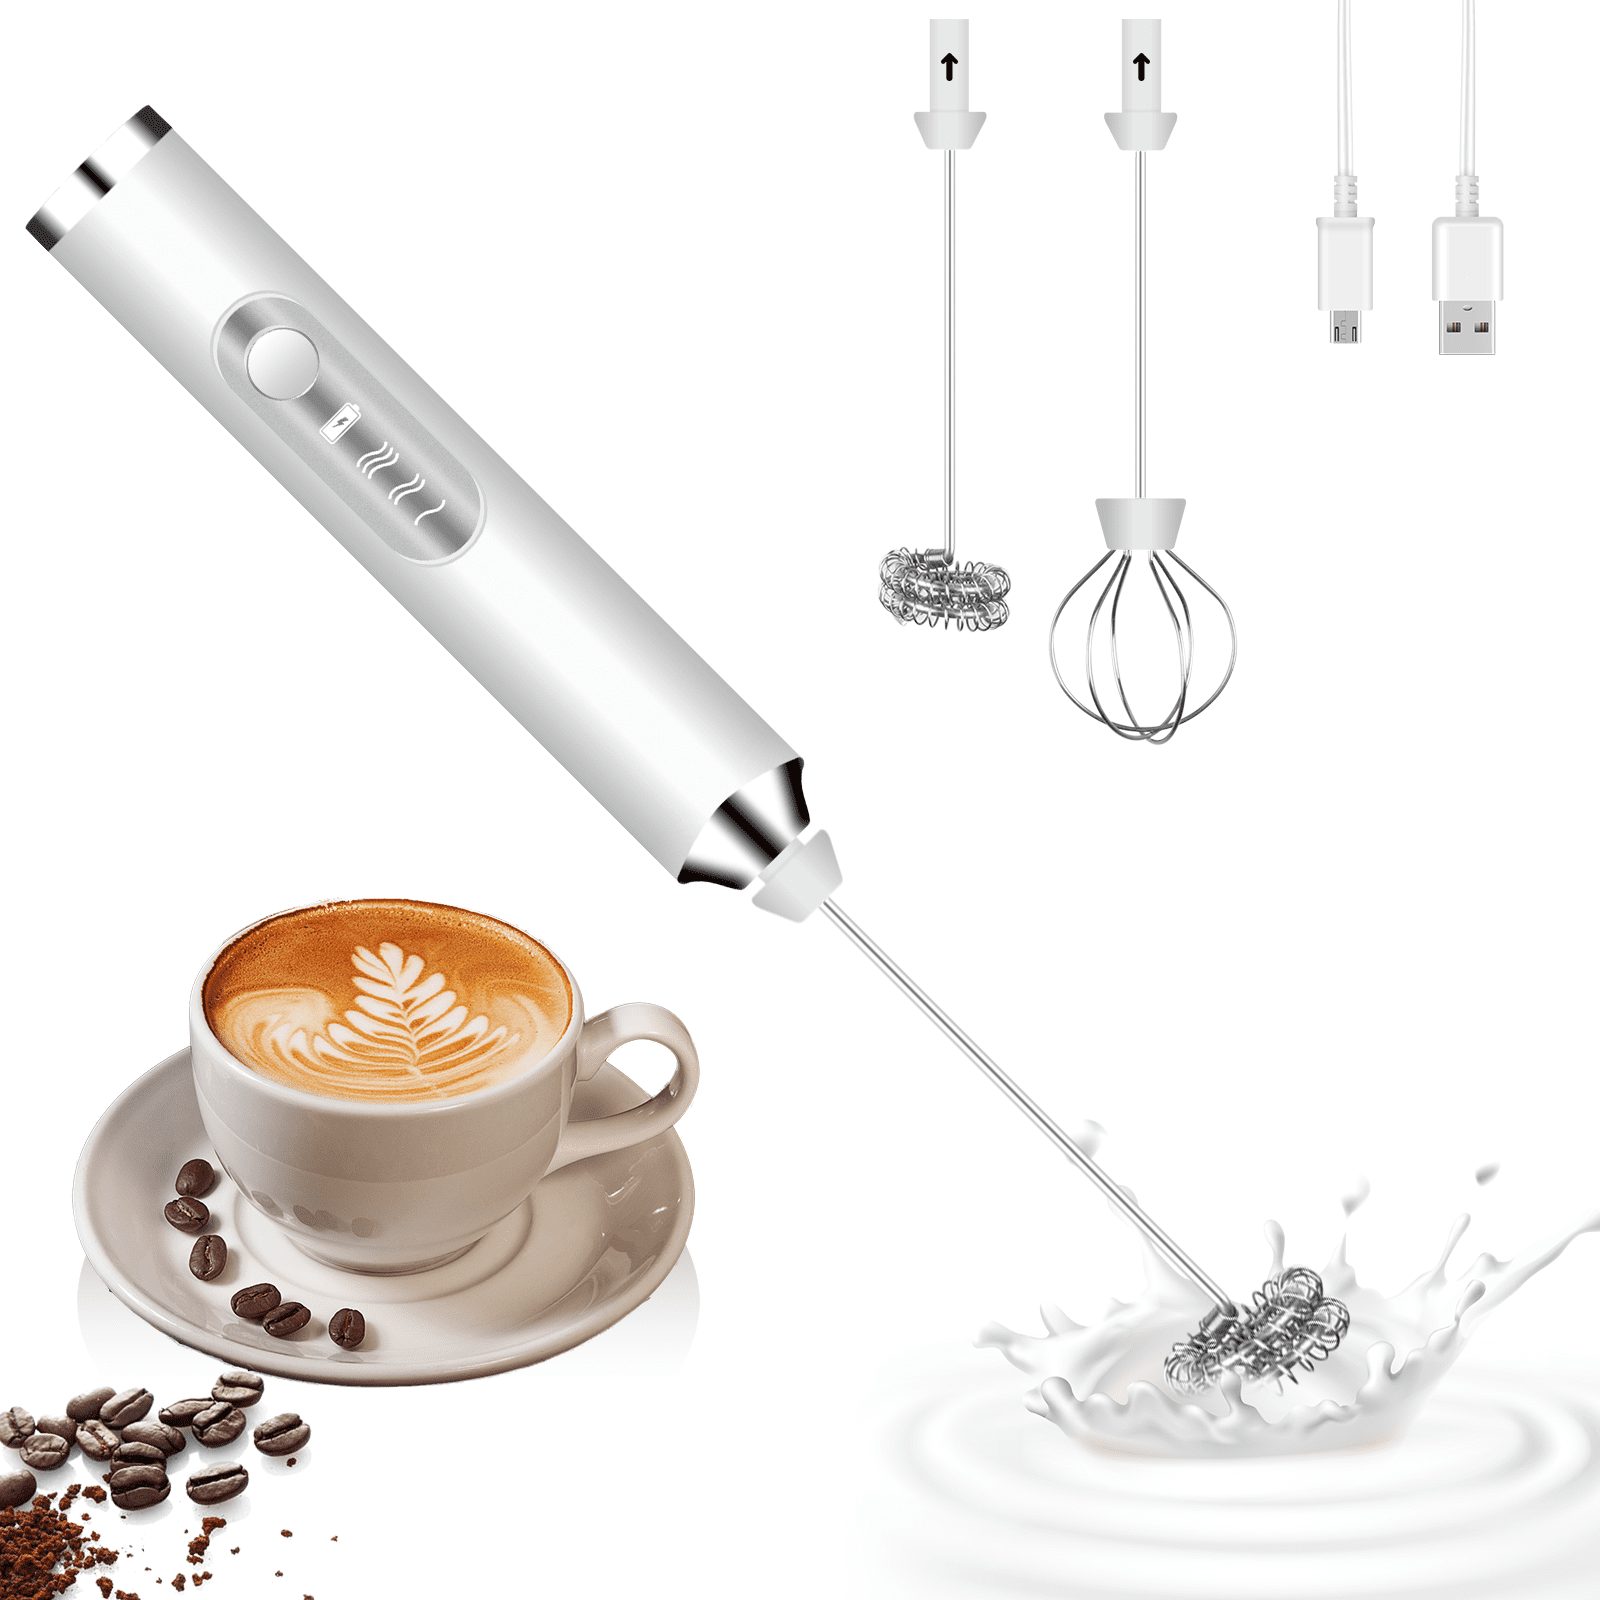  USB Rechargeable Milk Frother Handheld Multi-functional  Electric Foam Maker with 2 Stainless Whisks,3-Speed Adjustable Mini Milk  Foamer for Blending Bulletproof Coffee, Latte, Cappuccino Hot Chocolate:  Home & Kitchen